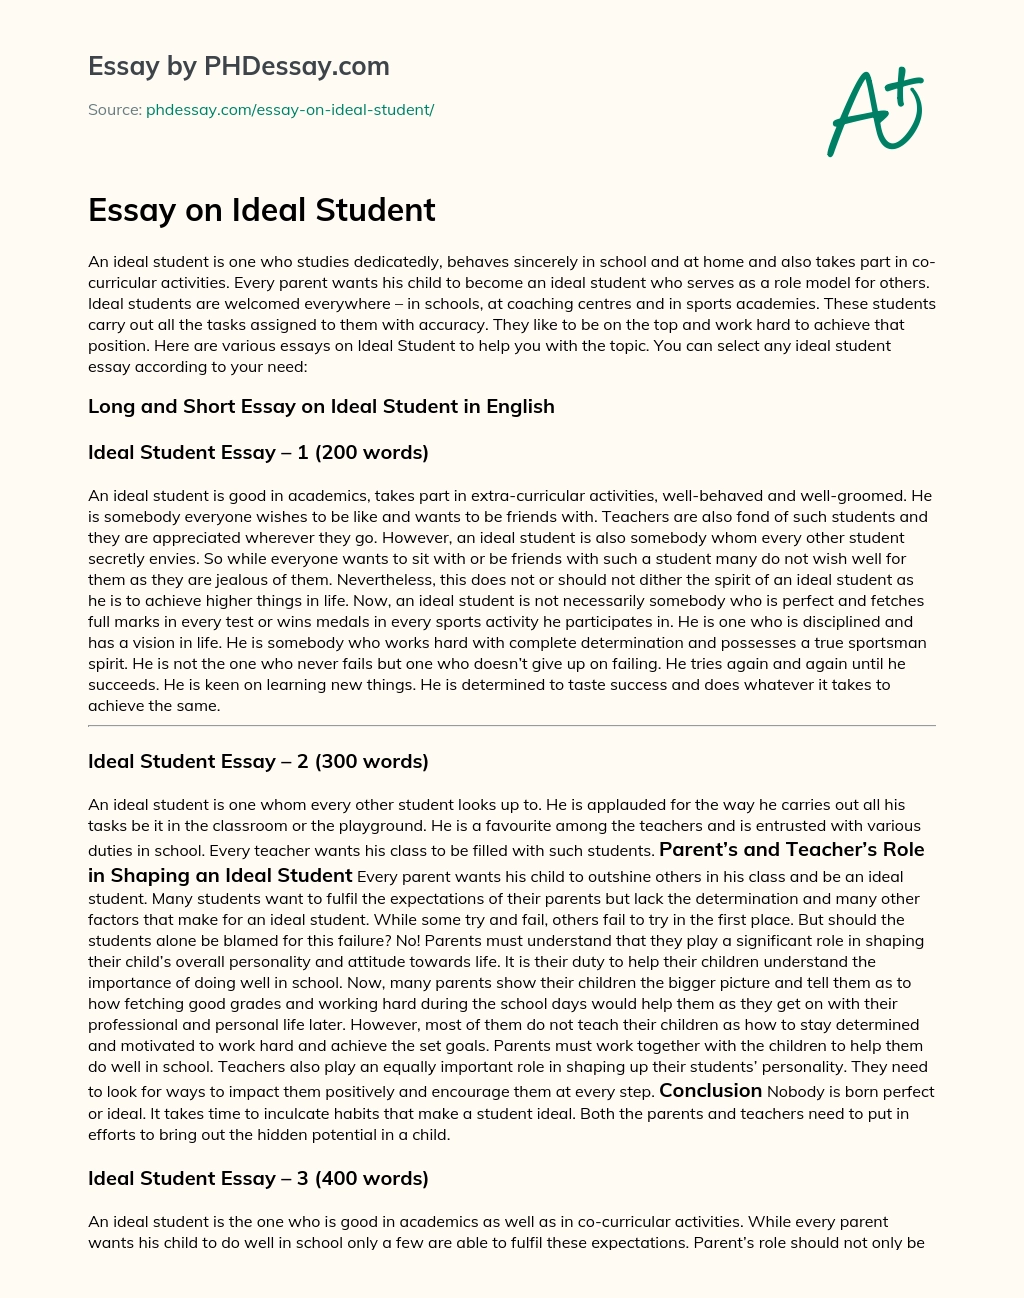 an ideal student essay for 2nd year